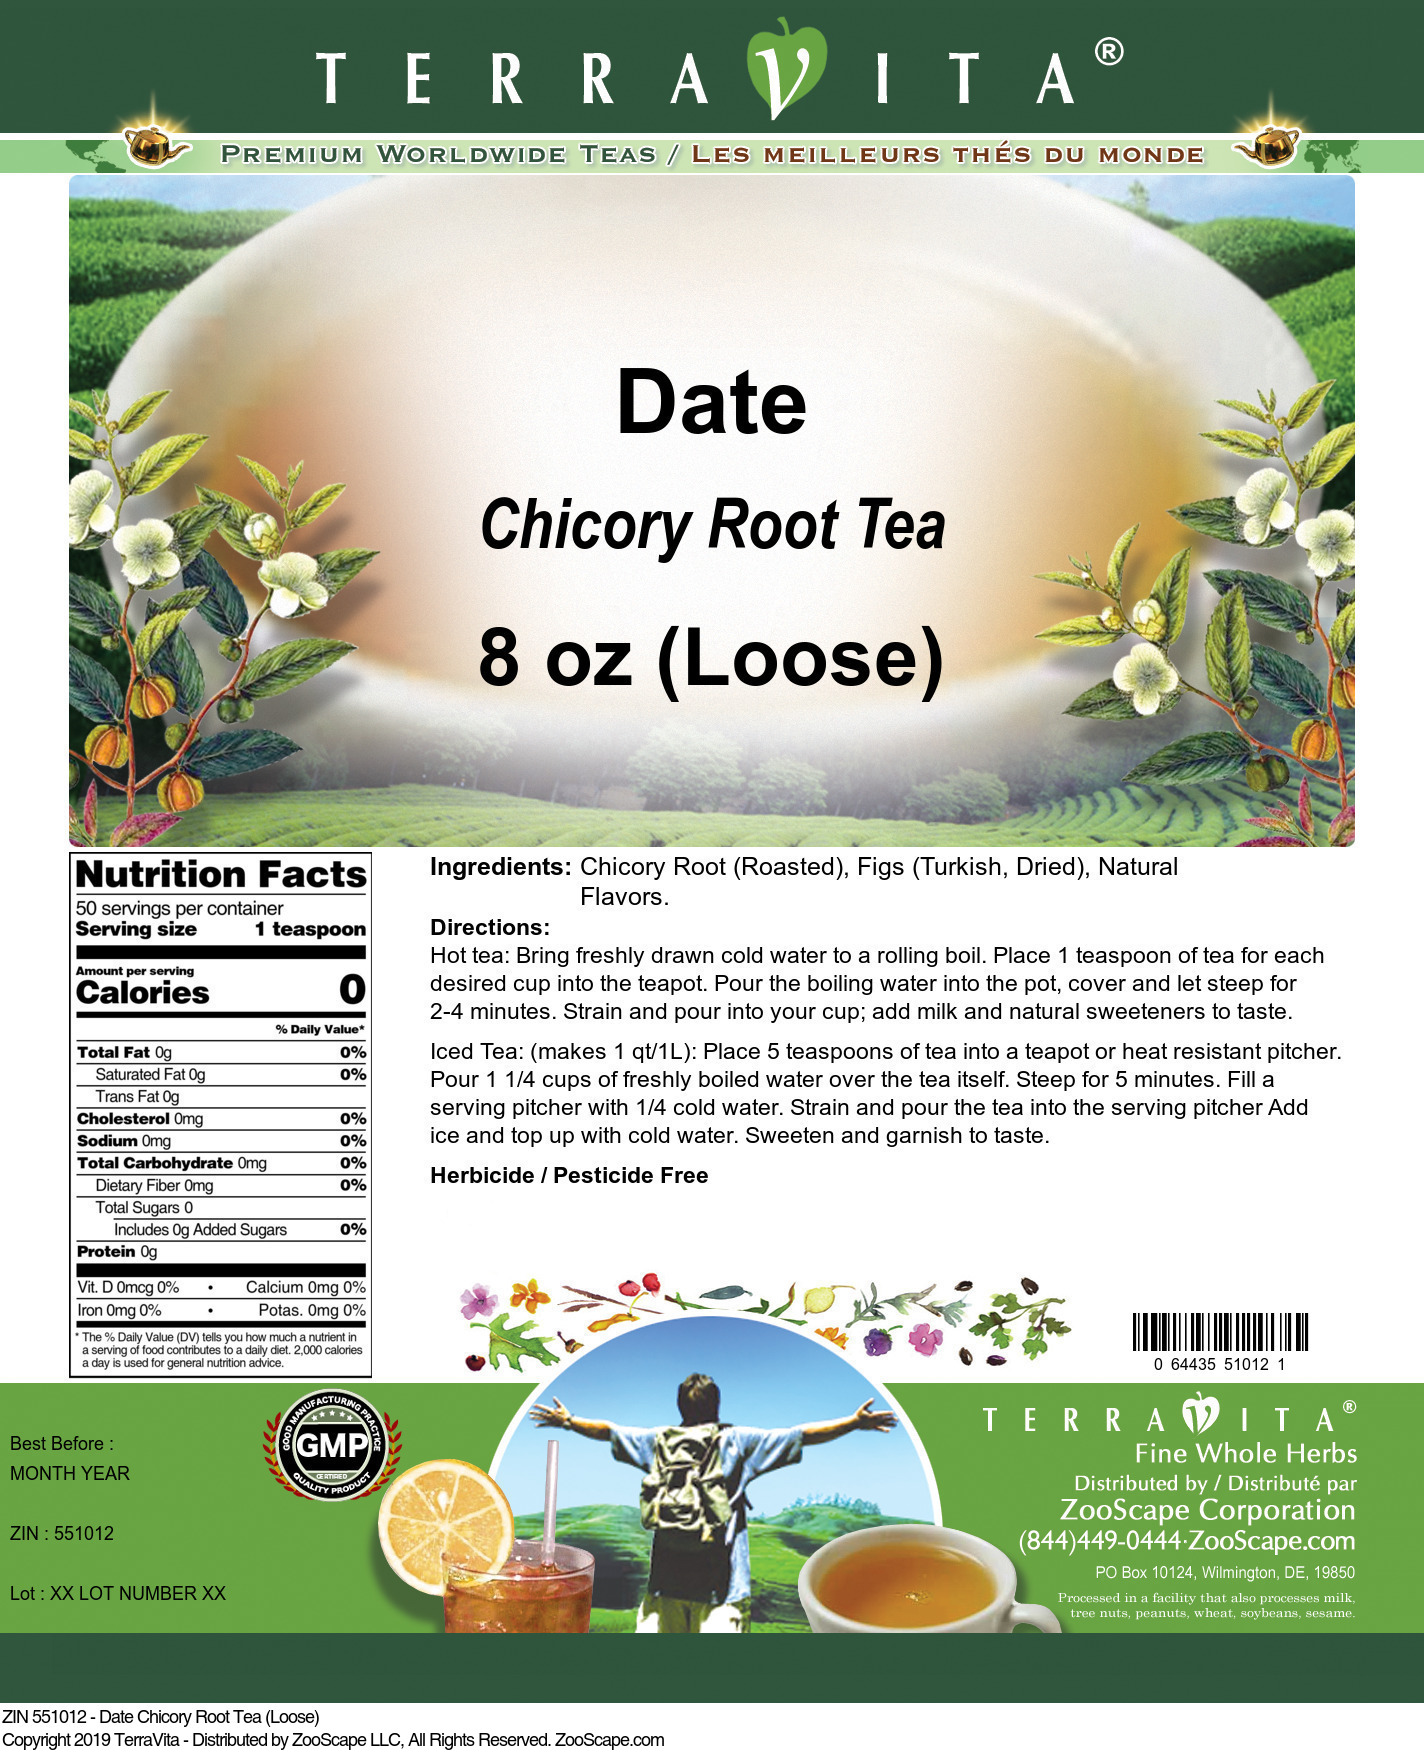 Date Chicory Root Tea (Loose) - Label